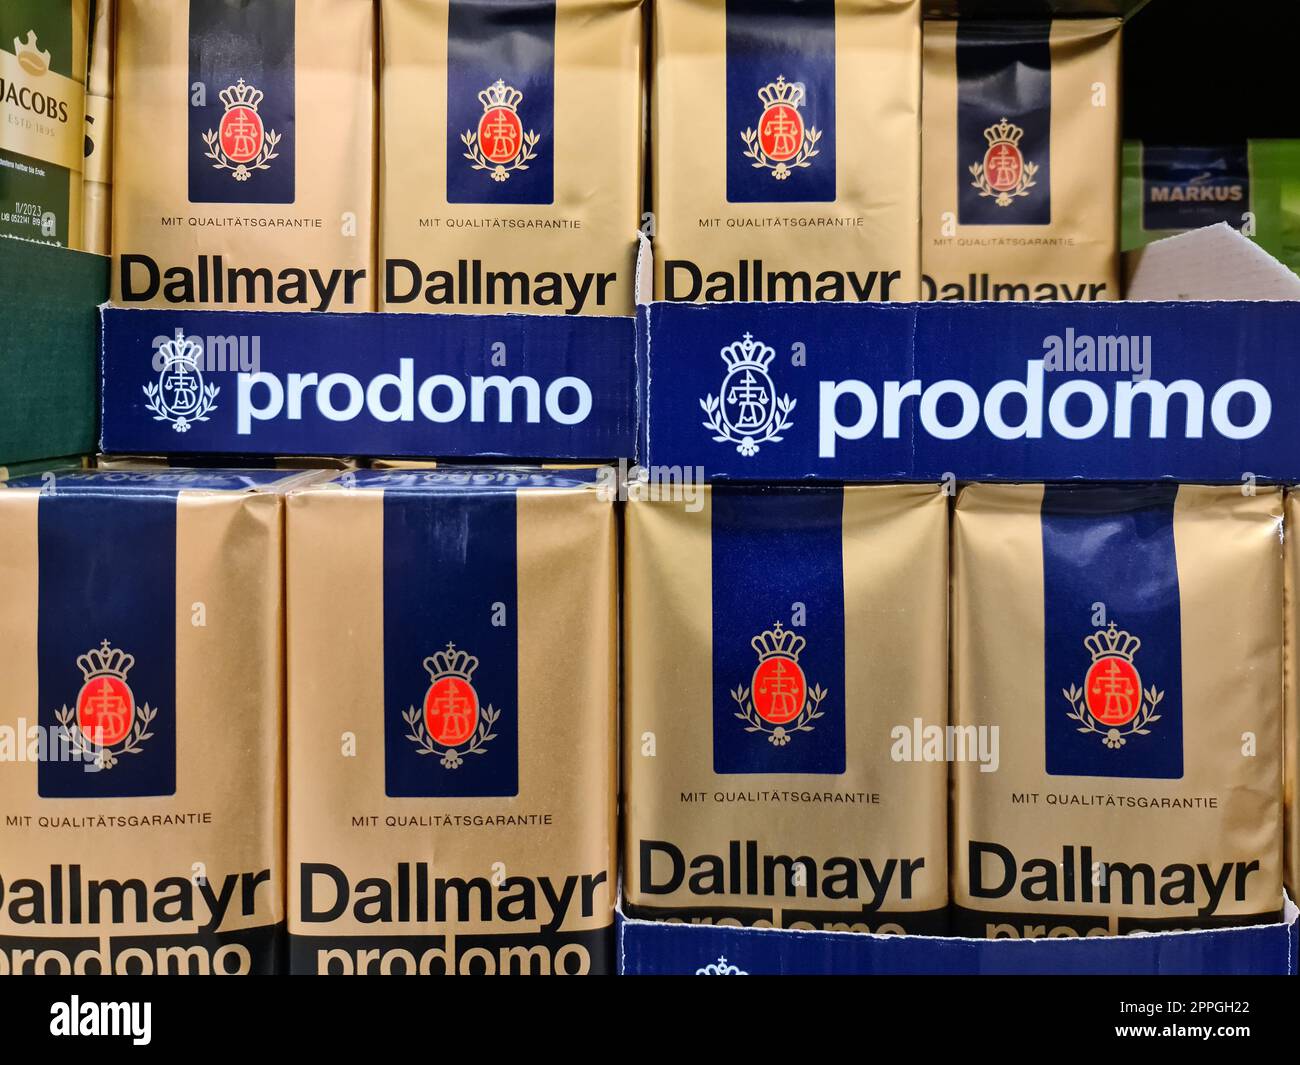 Kiel,Germany - 20 August 2022: Numerous packages of Dallmayr brand coffee on a supermarket shelf. Stock Photo